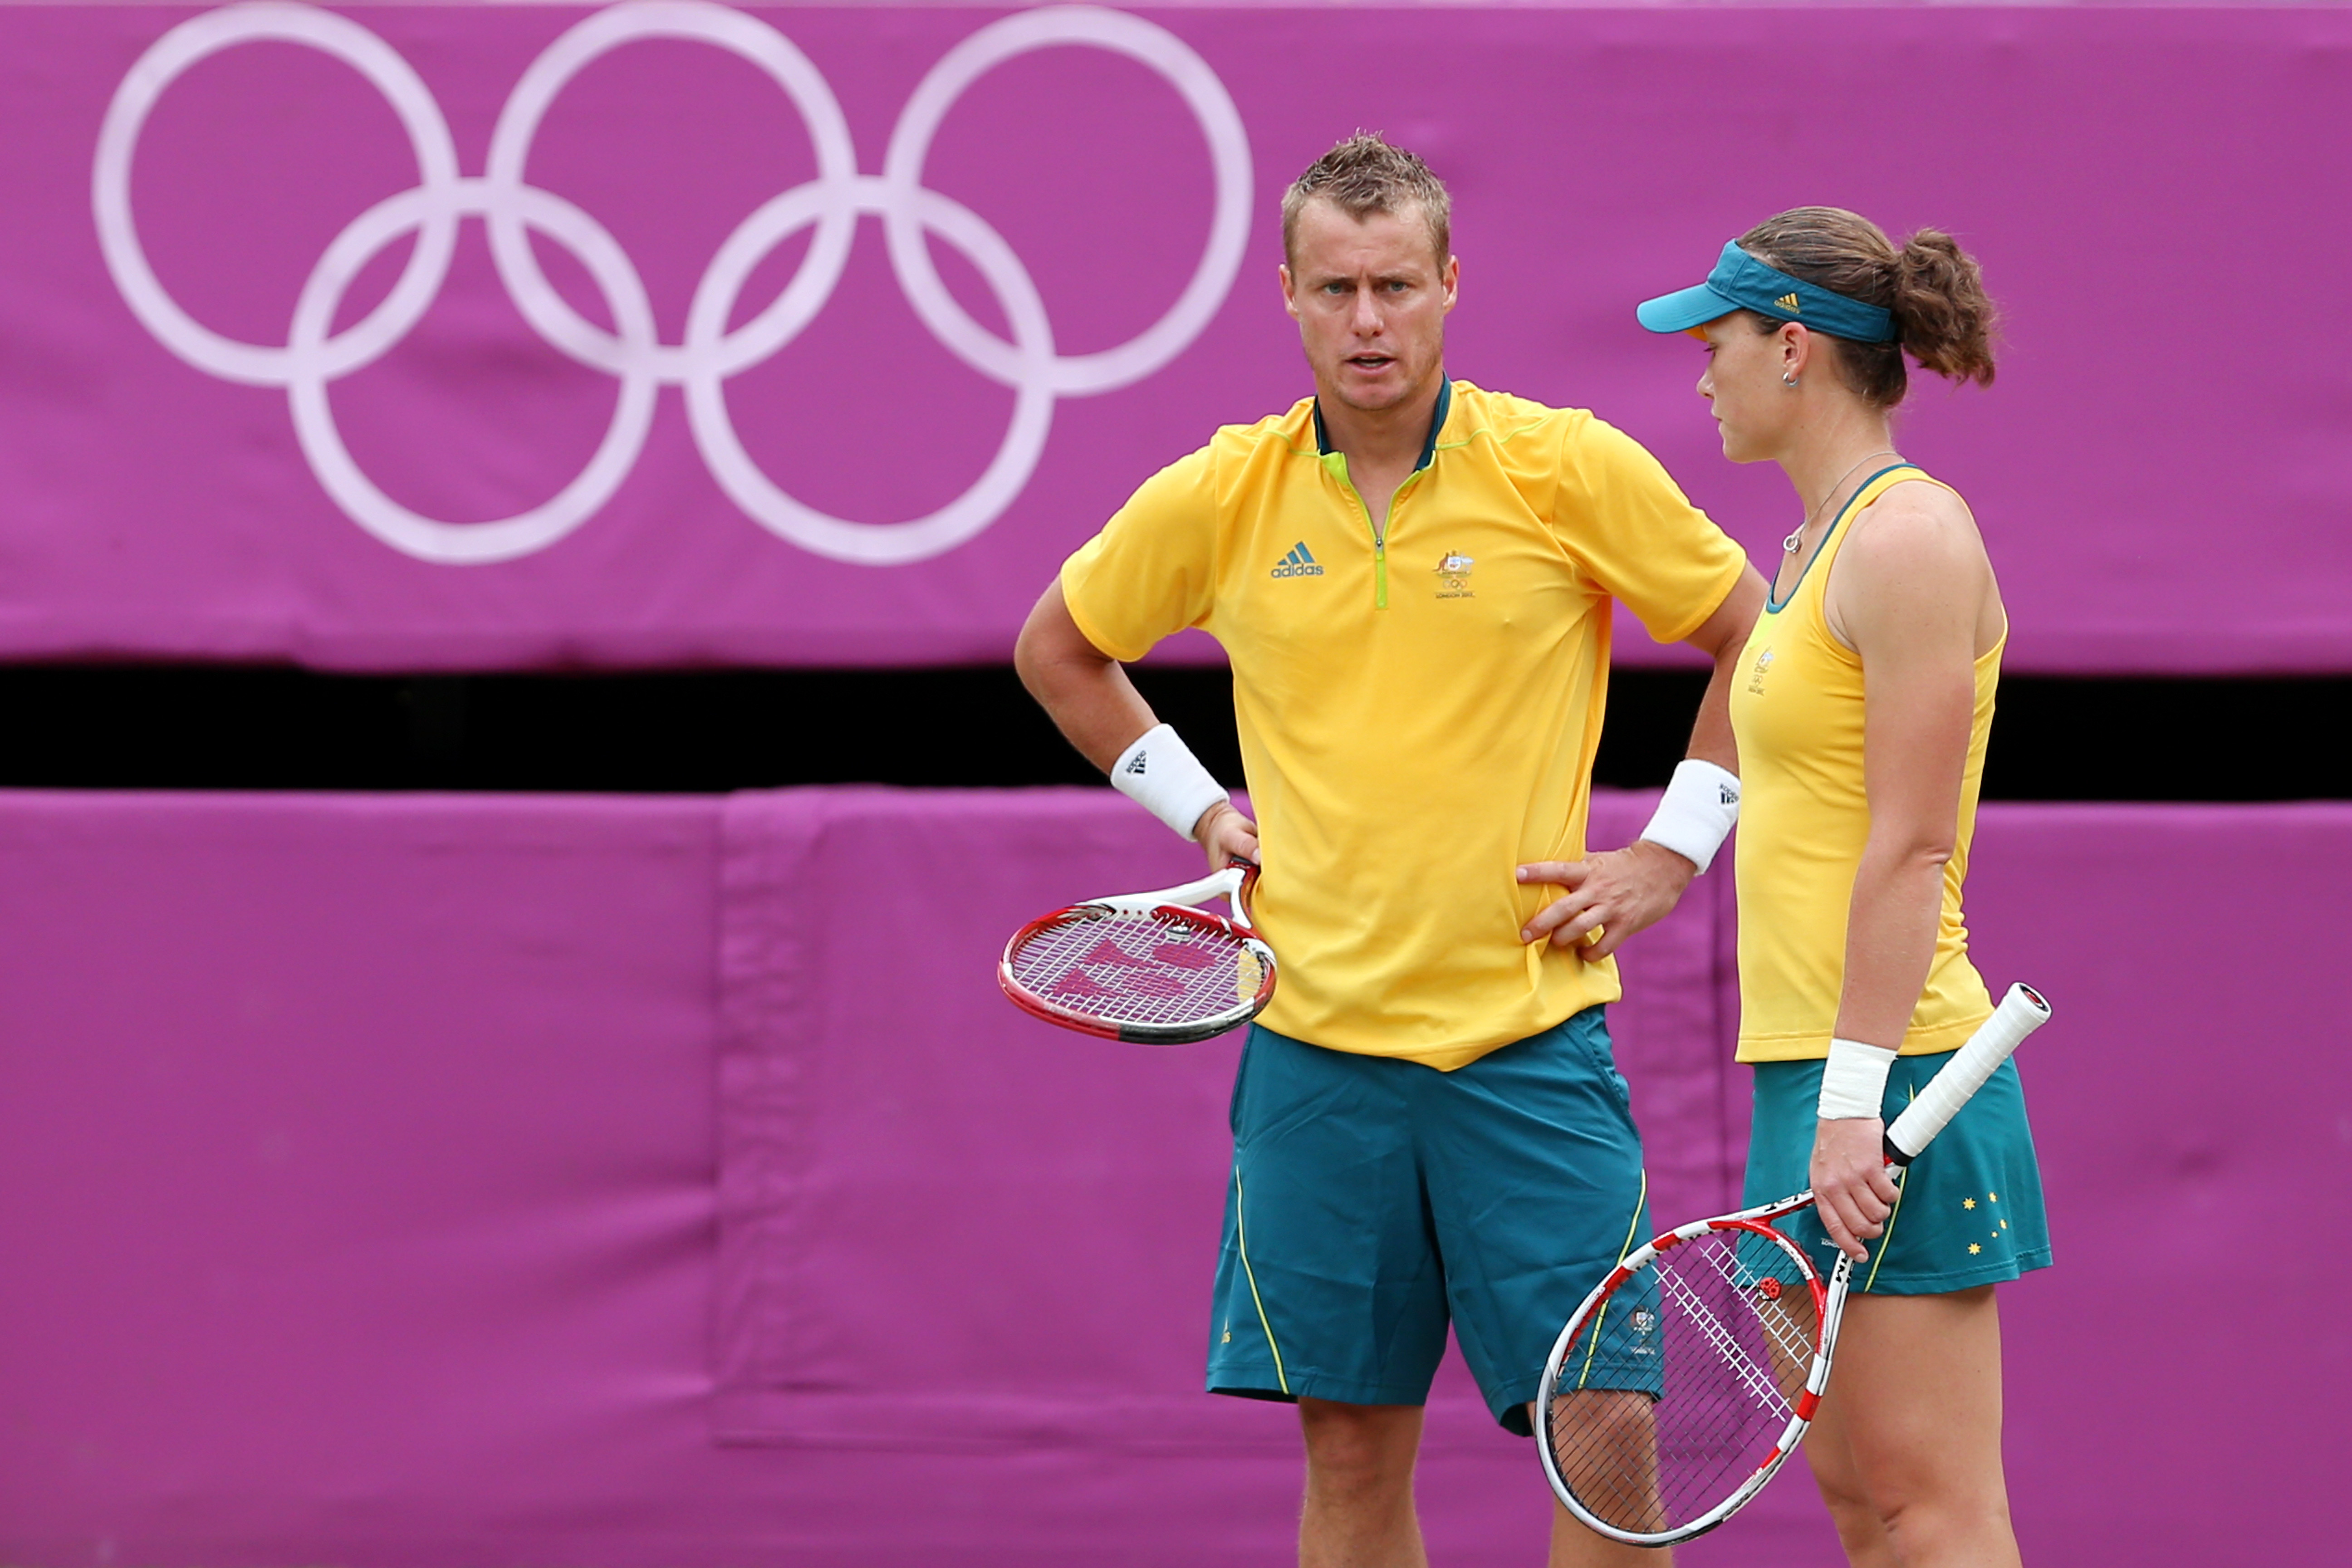 Lleyton Hewitt and Samantha Stosur during their quarter-final loss at the London Olympics in 2012.